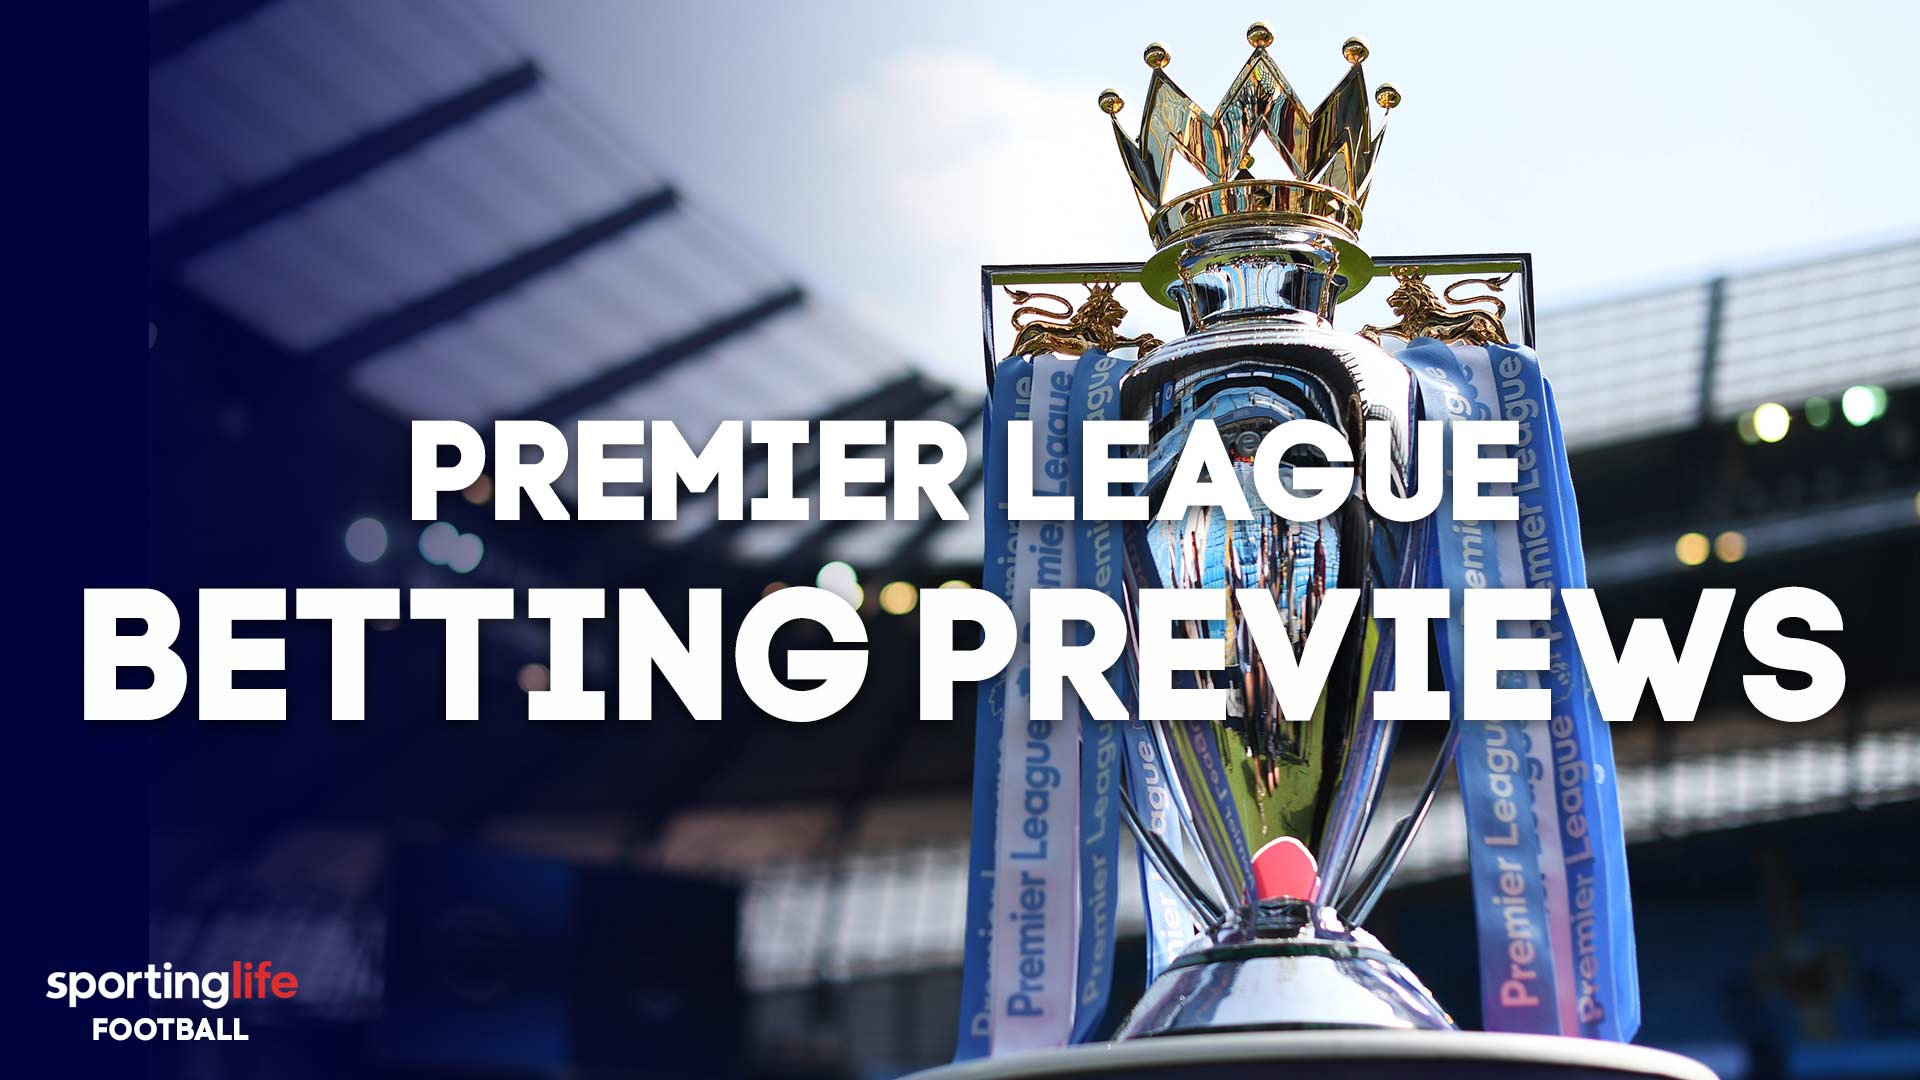 Premier League predictions, odds and betting tips for Saturday's